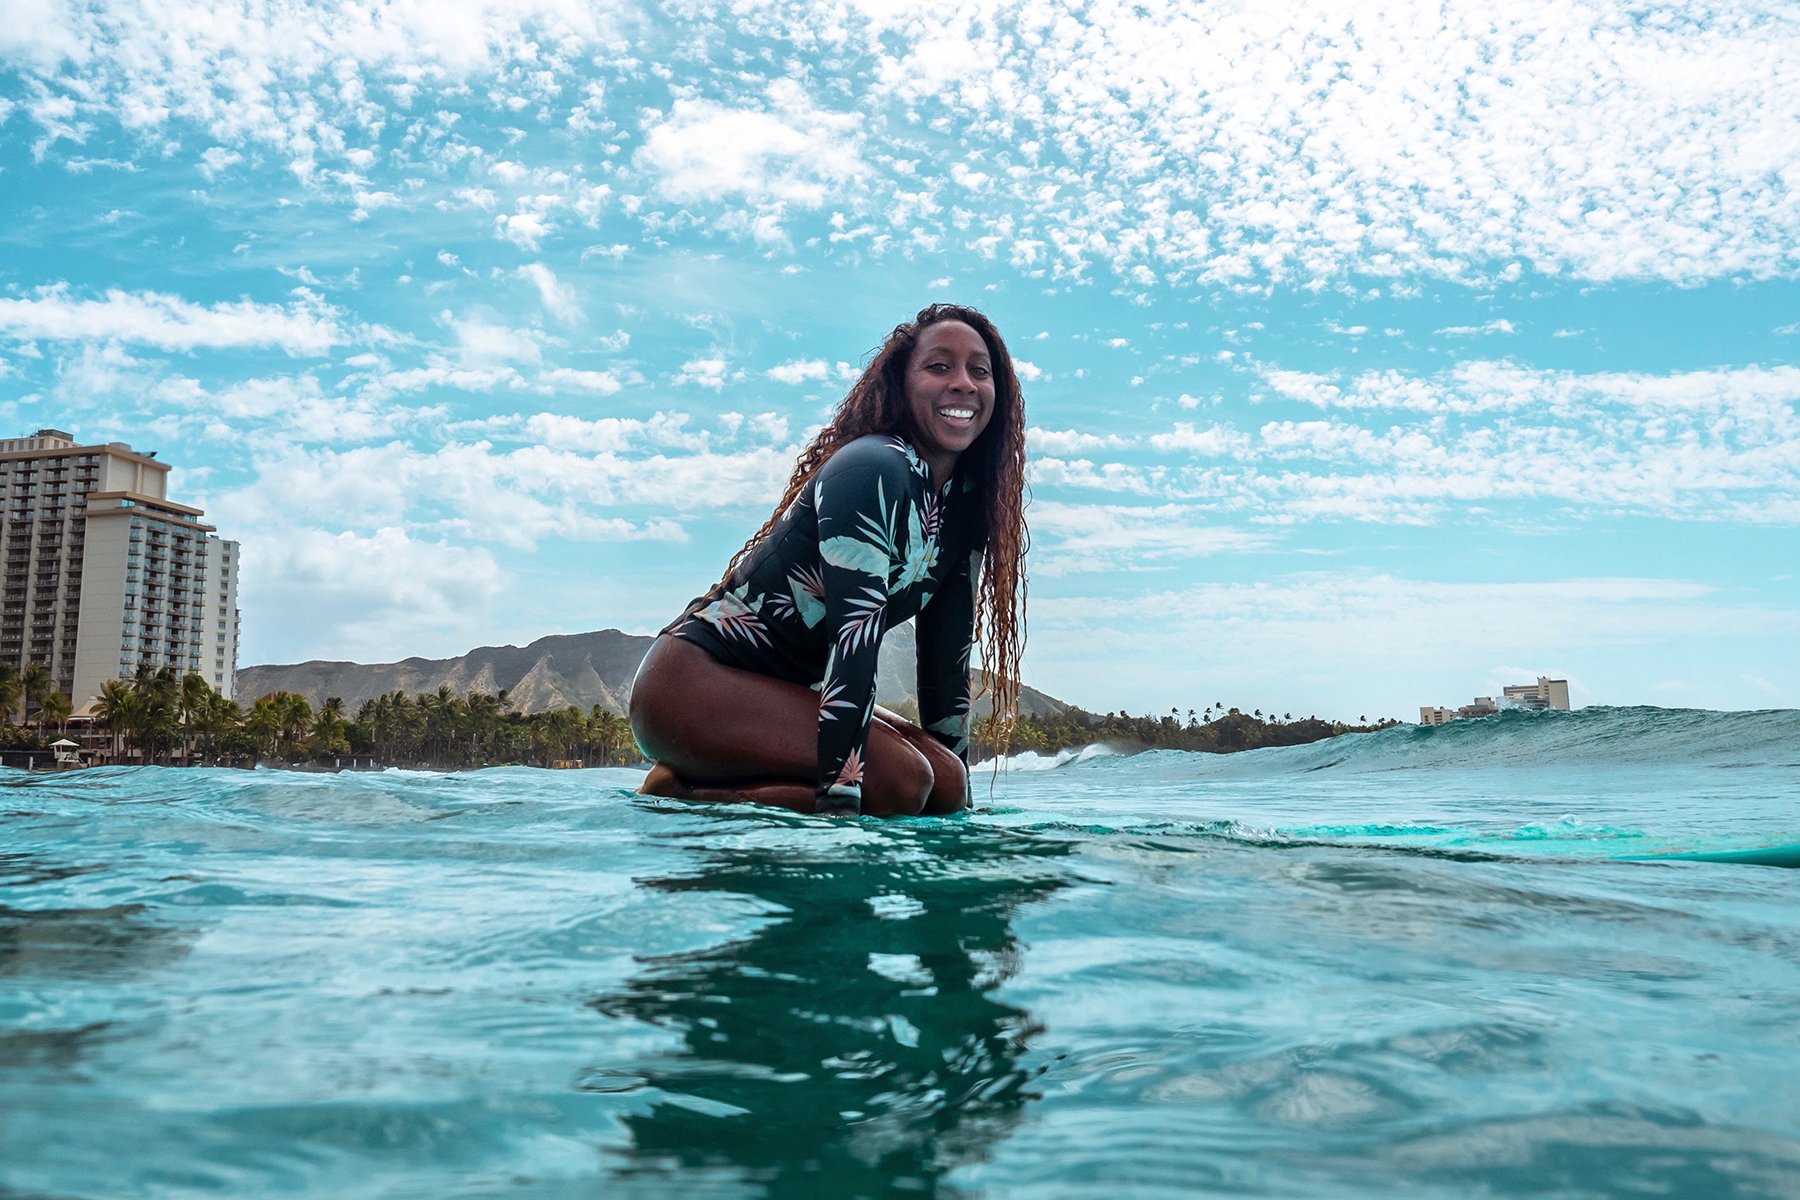 Girls Can't Surf shows how determined women battled sexism in their sport